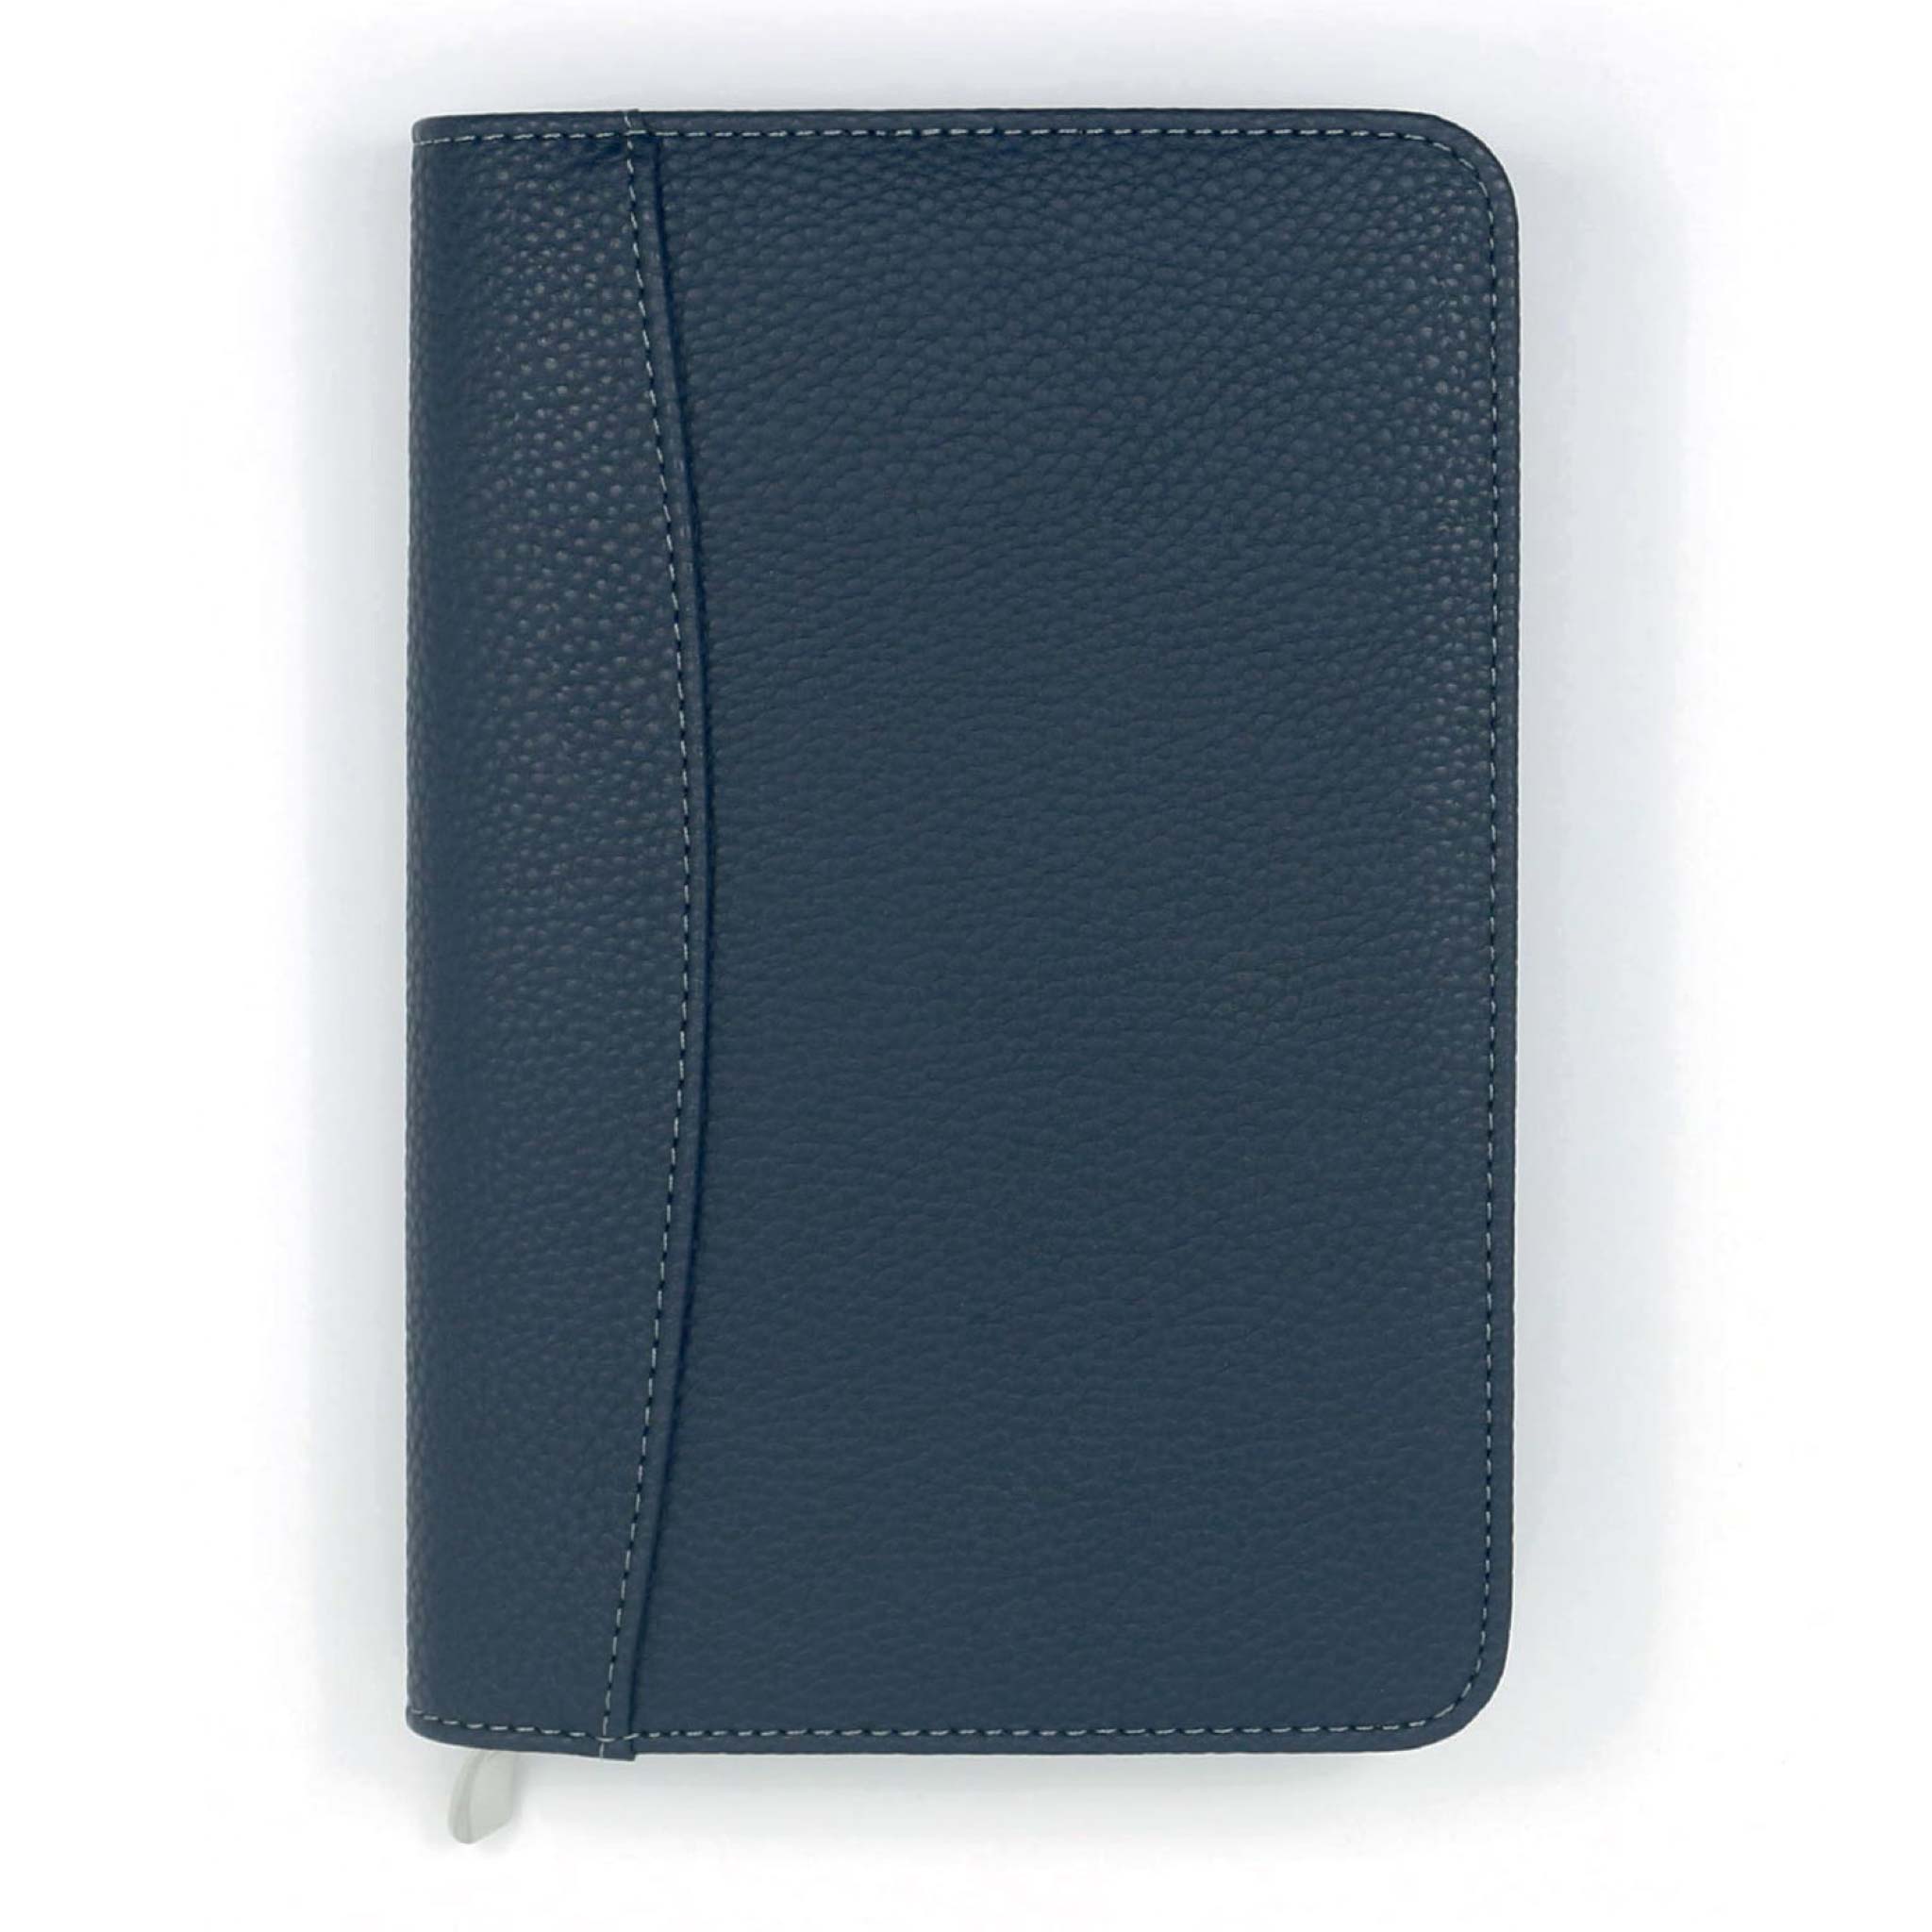 An image of Pocket Life Book Diary Cover I Full-Zip Slimline Cover with Pocket Midnight Blue